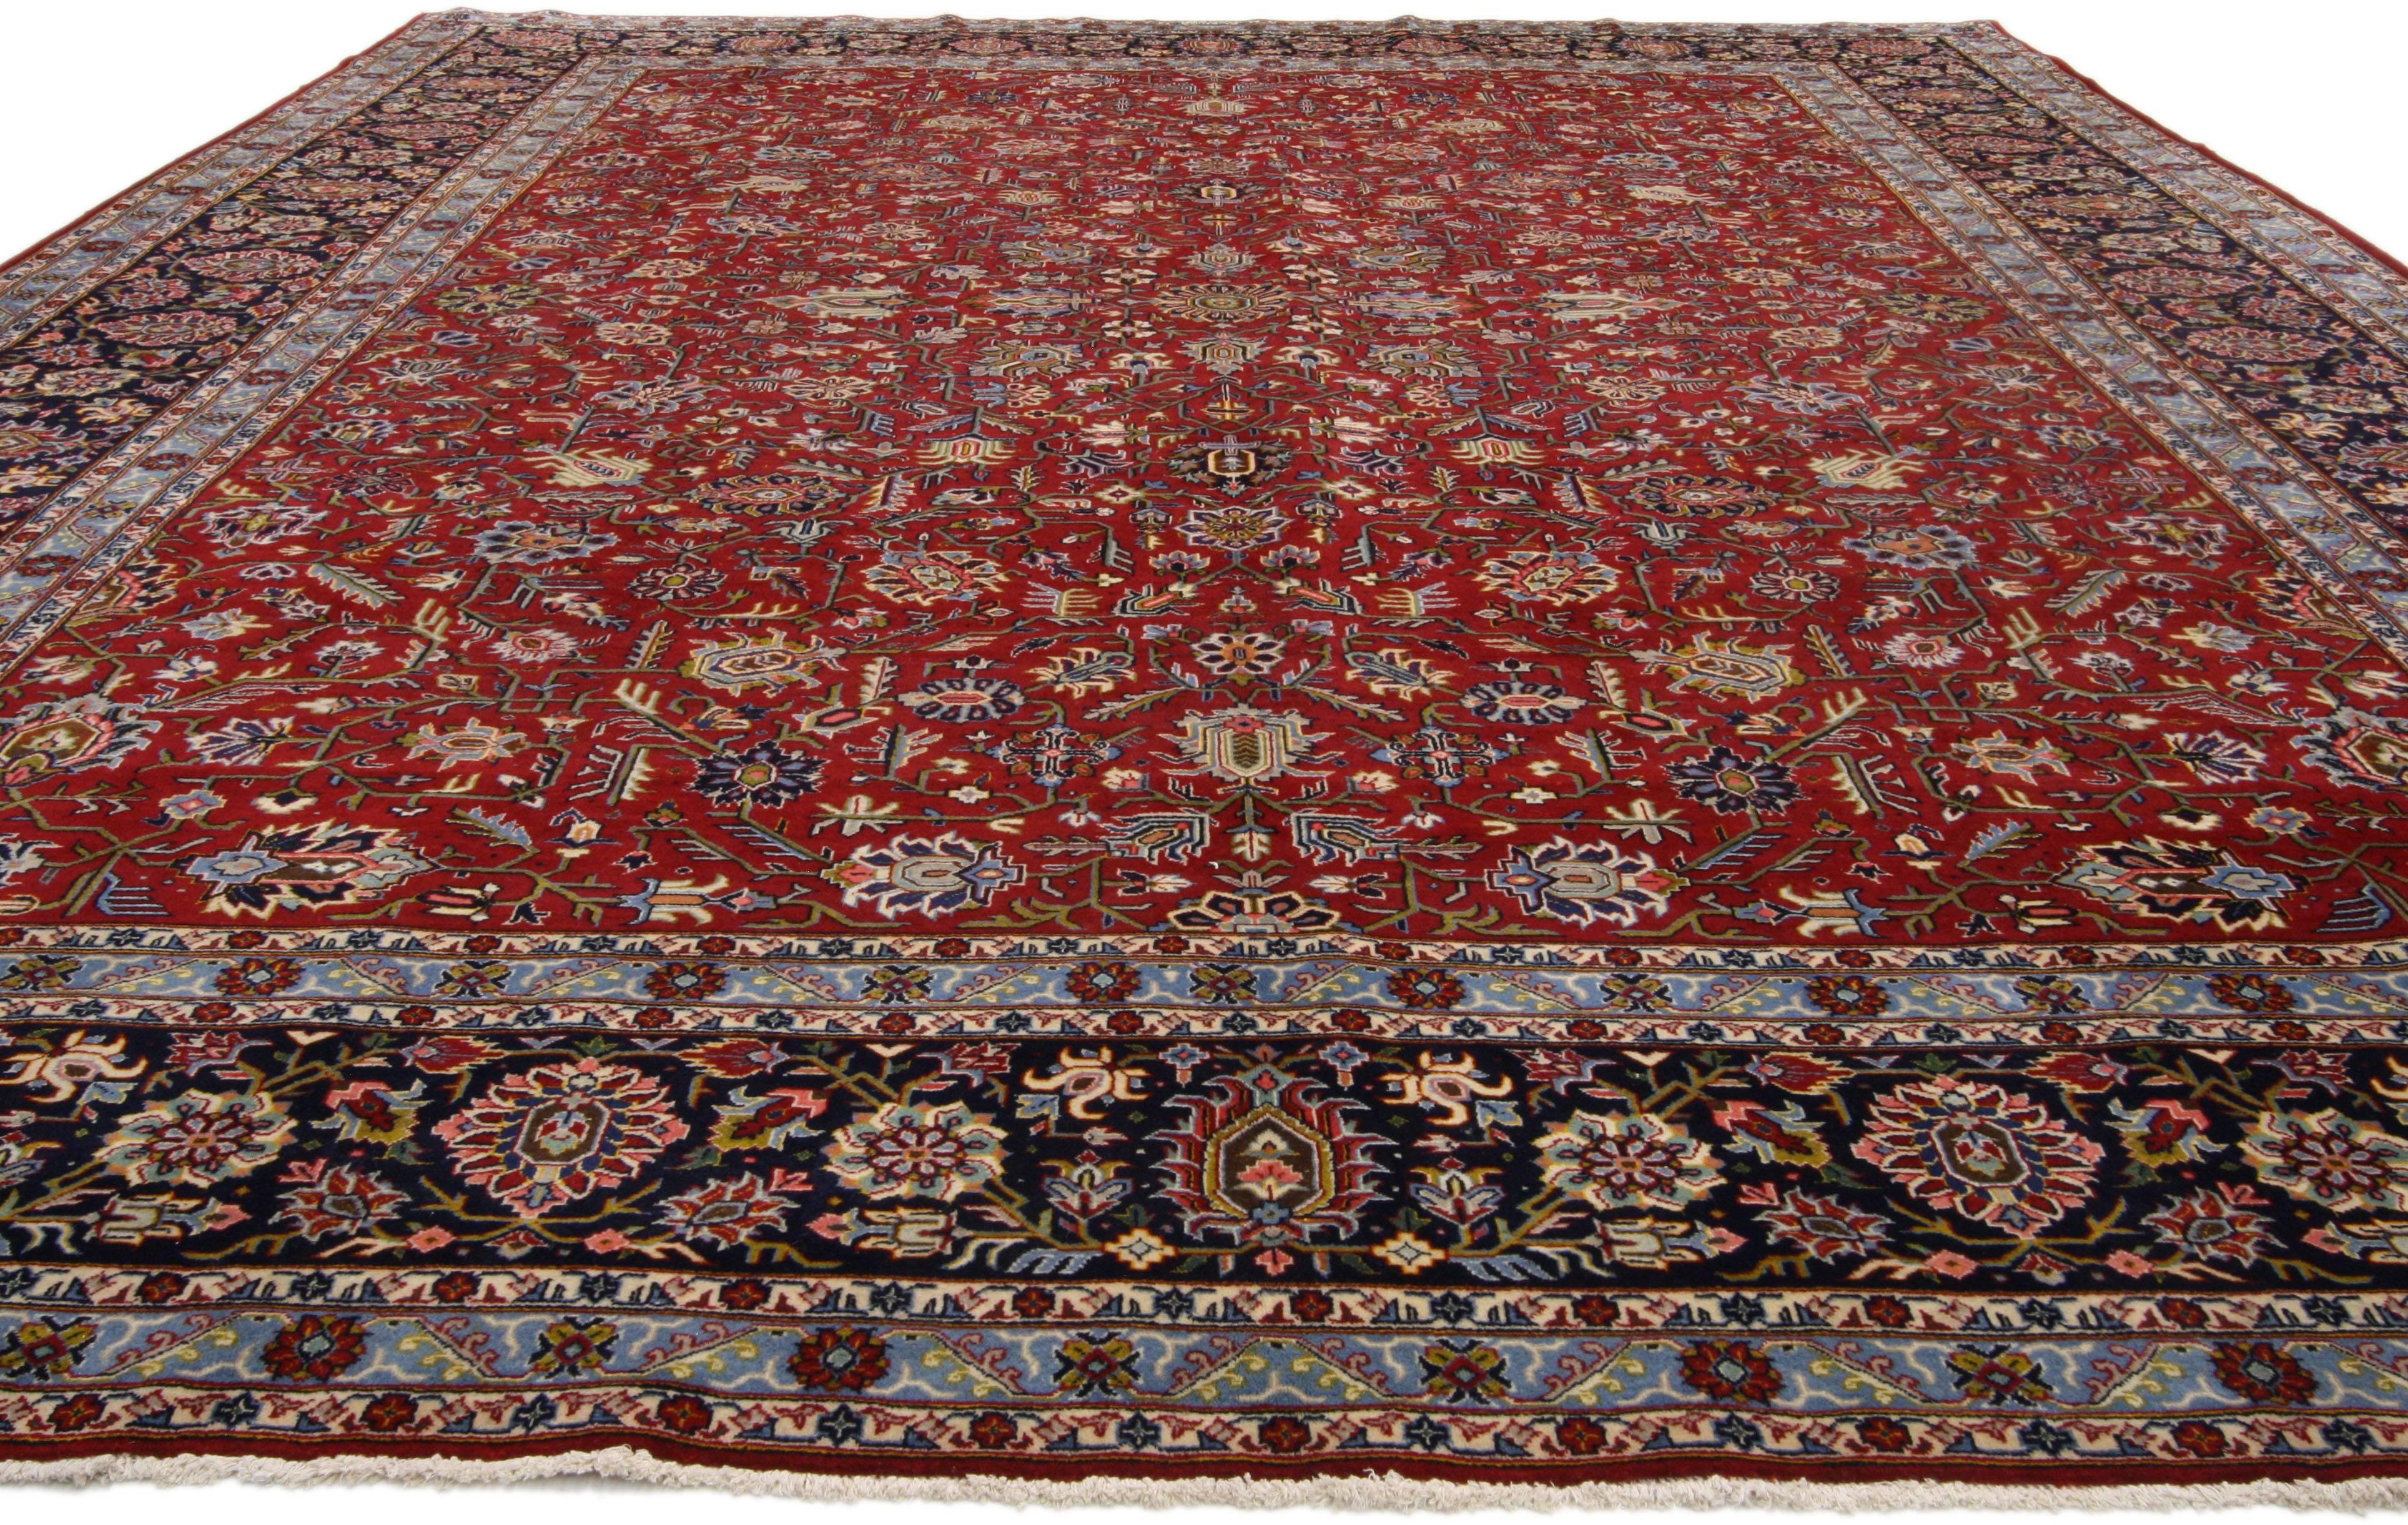 76265, vintage Persian Kashan area rug with traditional style. This hand-knotted wool vintage Persian Kashan area rug features an all-over botanical pattern composed of lotus, palmettes and angular vines on a red field surrounded by a Classic ink